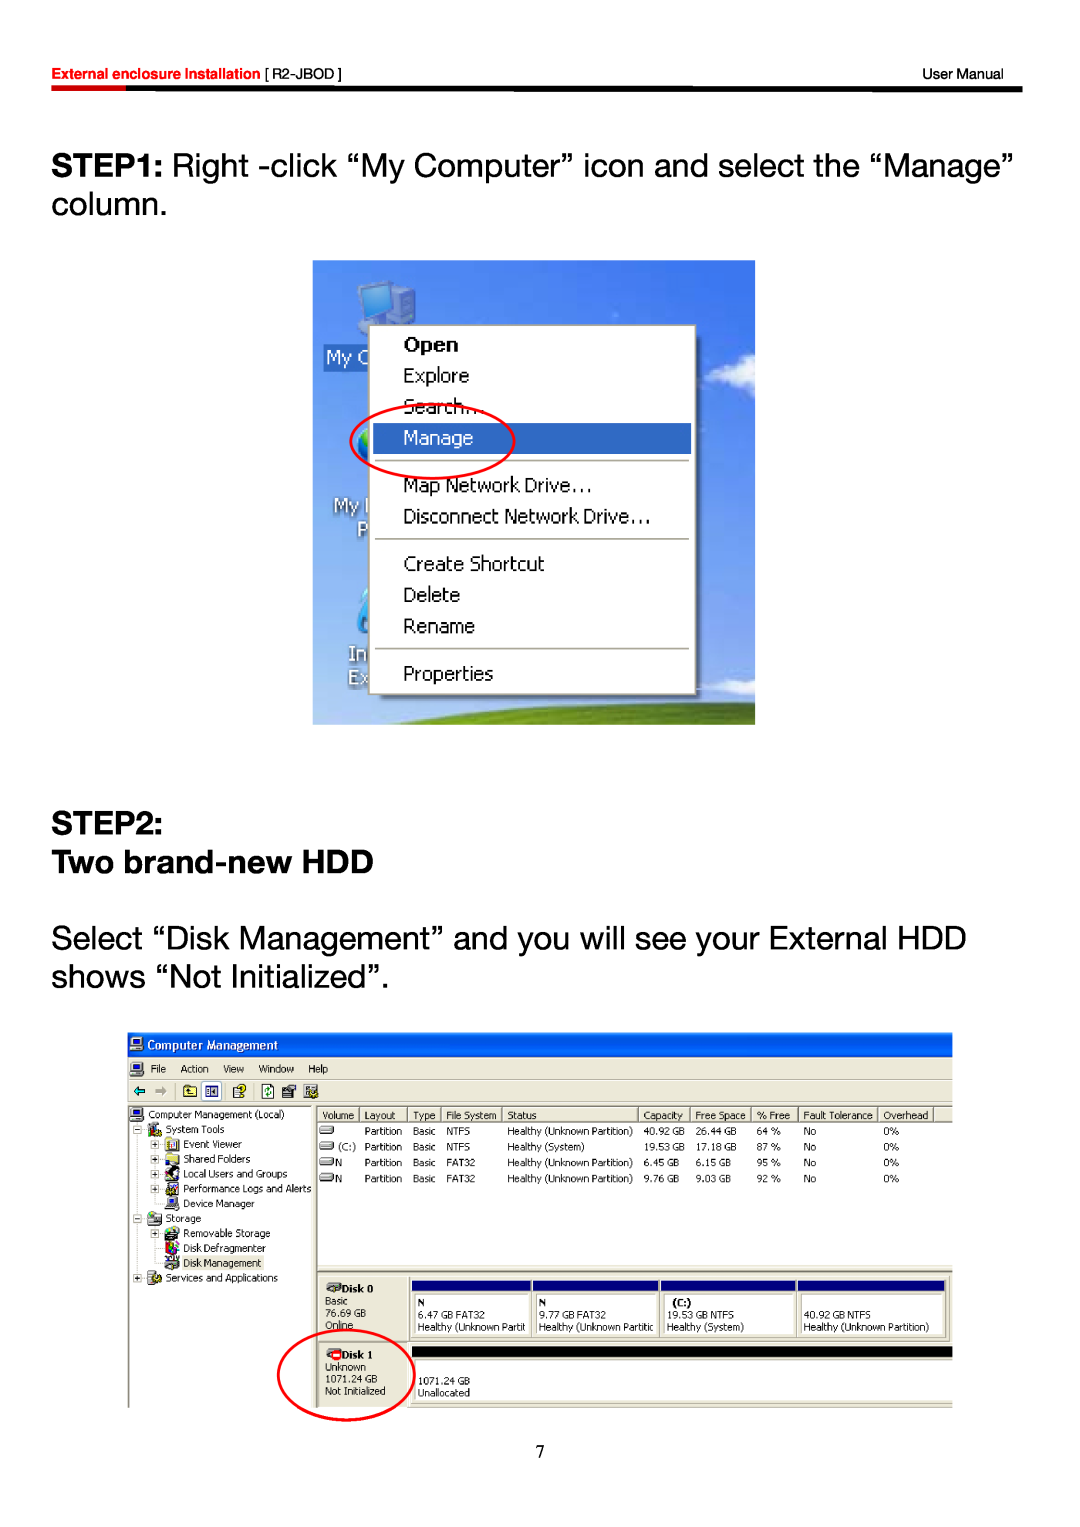 Rosewill R2-JBOD user manual Right -click “My Computer” icon and select the “Manage” column, Two brand-new HDD, User Manual 